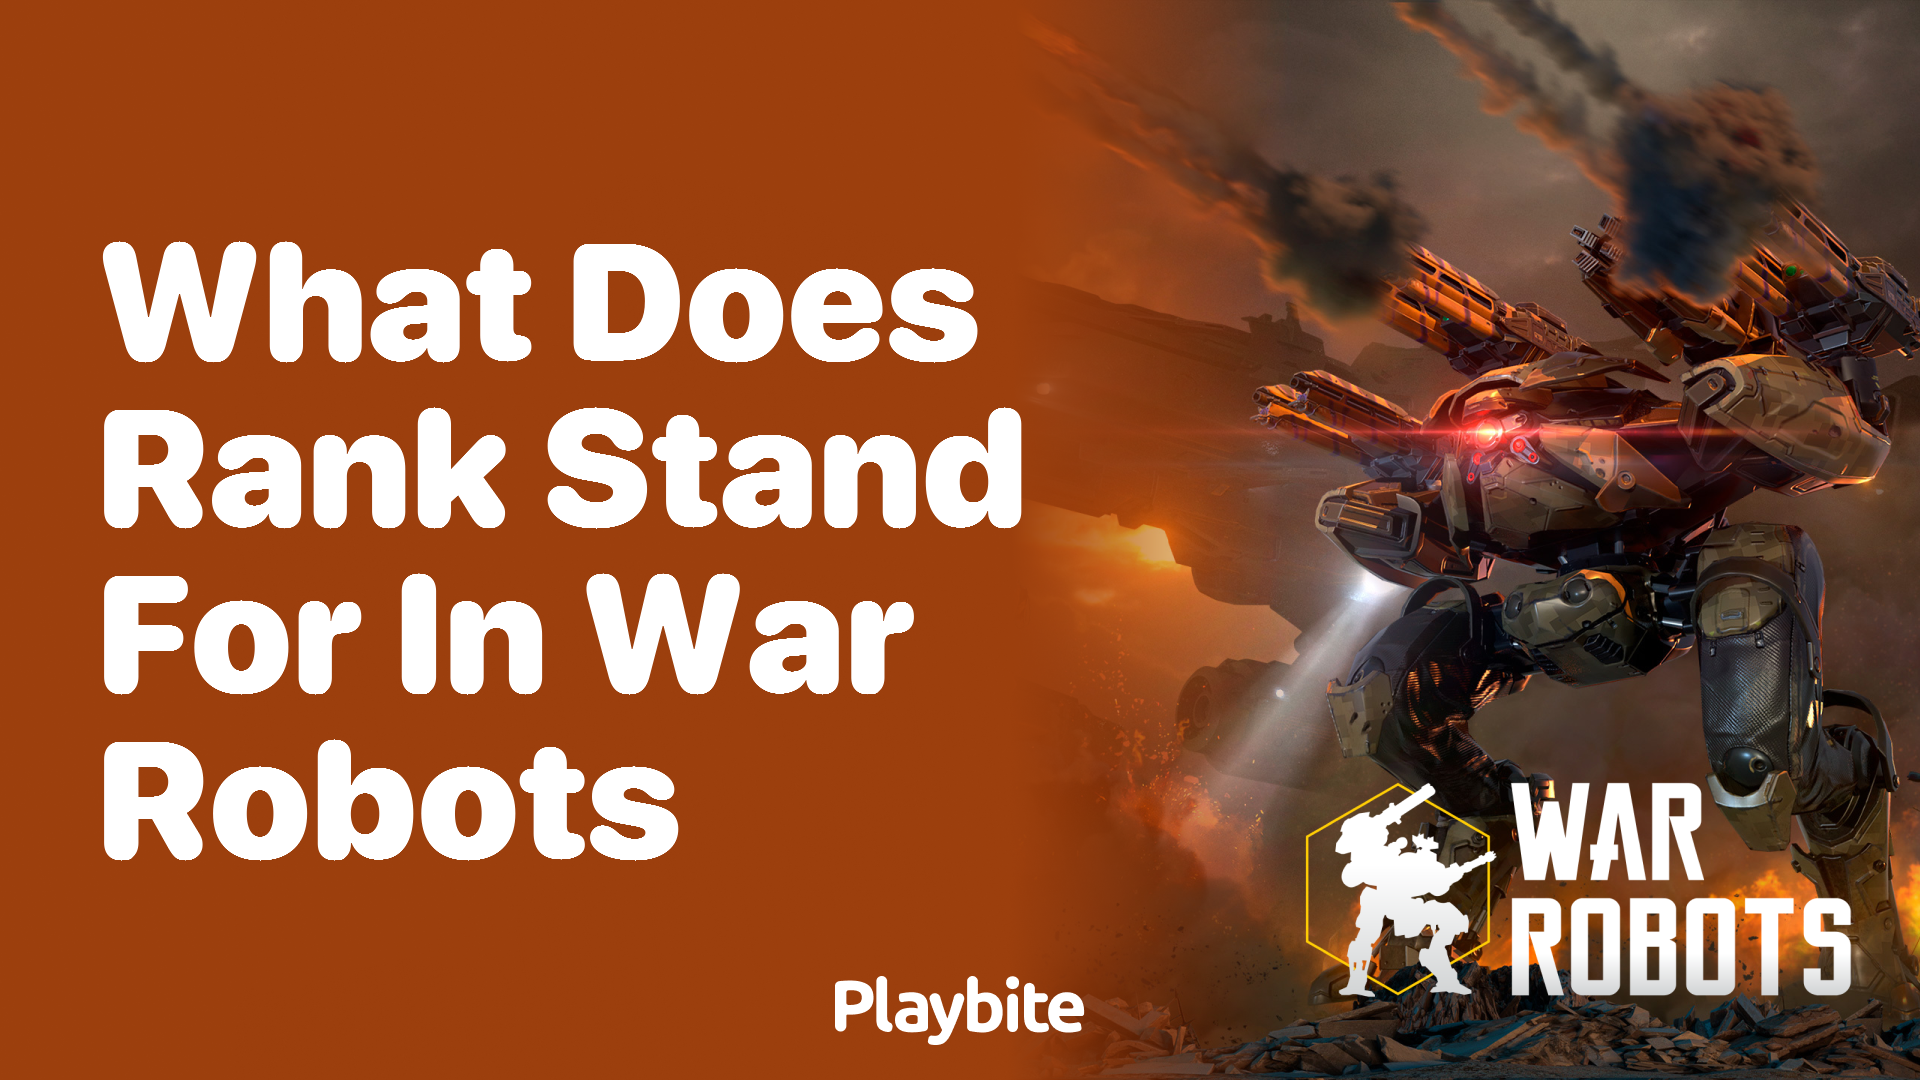 What Does Rank Stand For in War Robots?